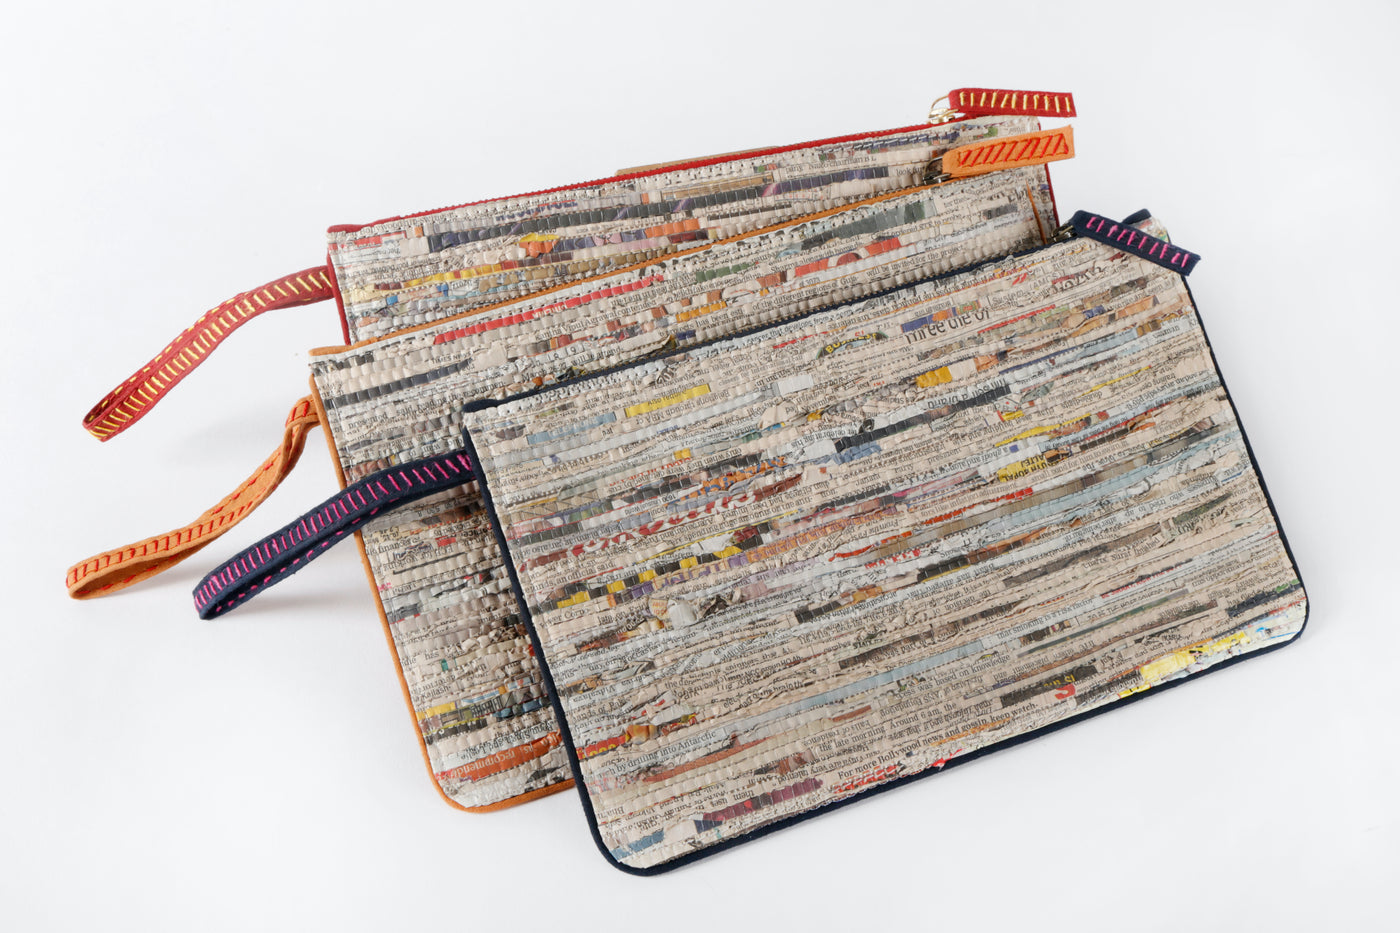 Handmade, functional wristlet made from cotton and newspaper strip with a newsprint pattern.